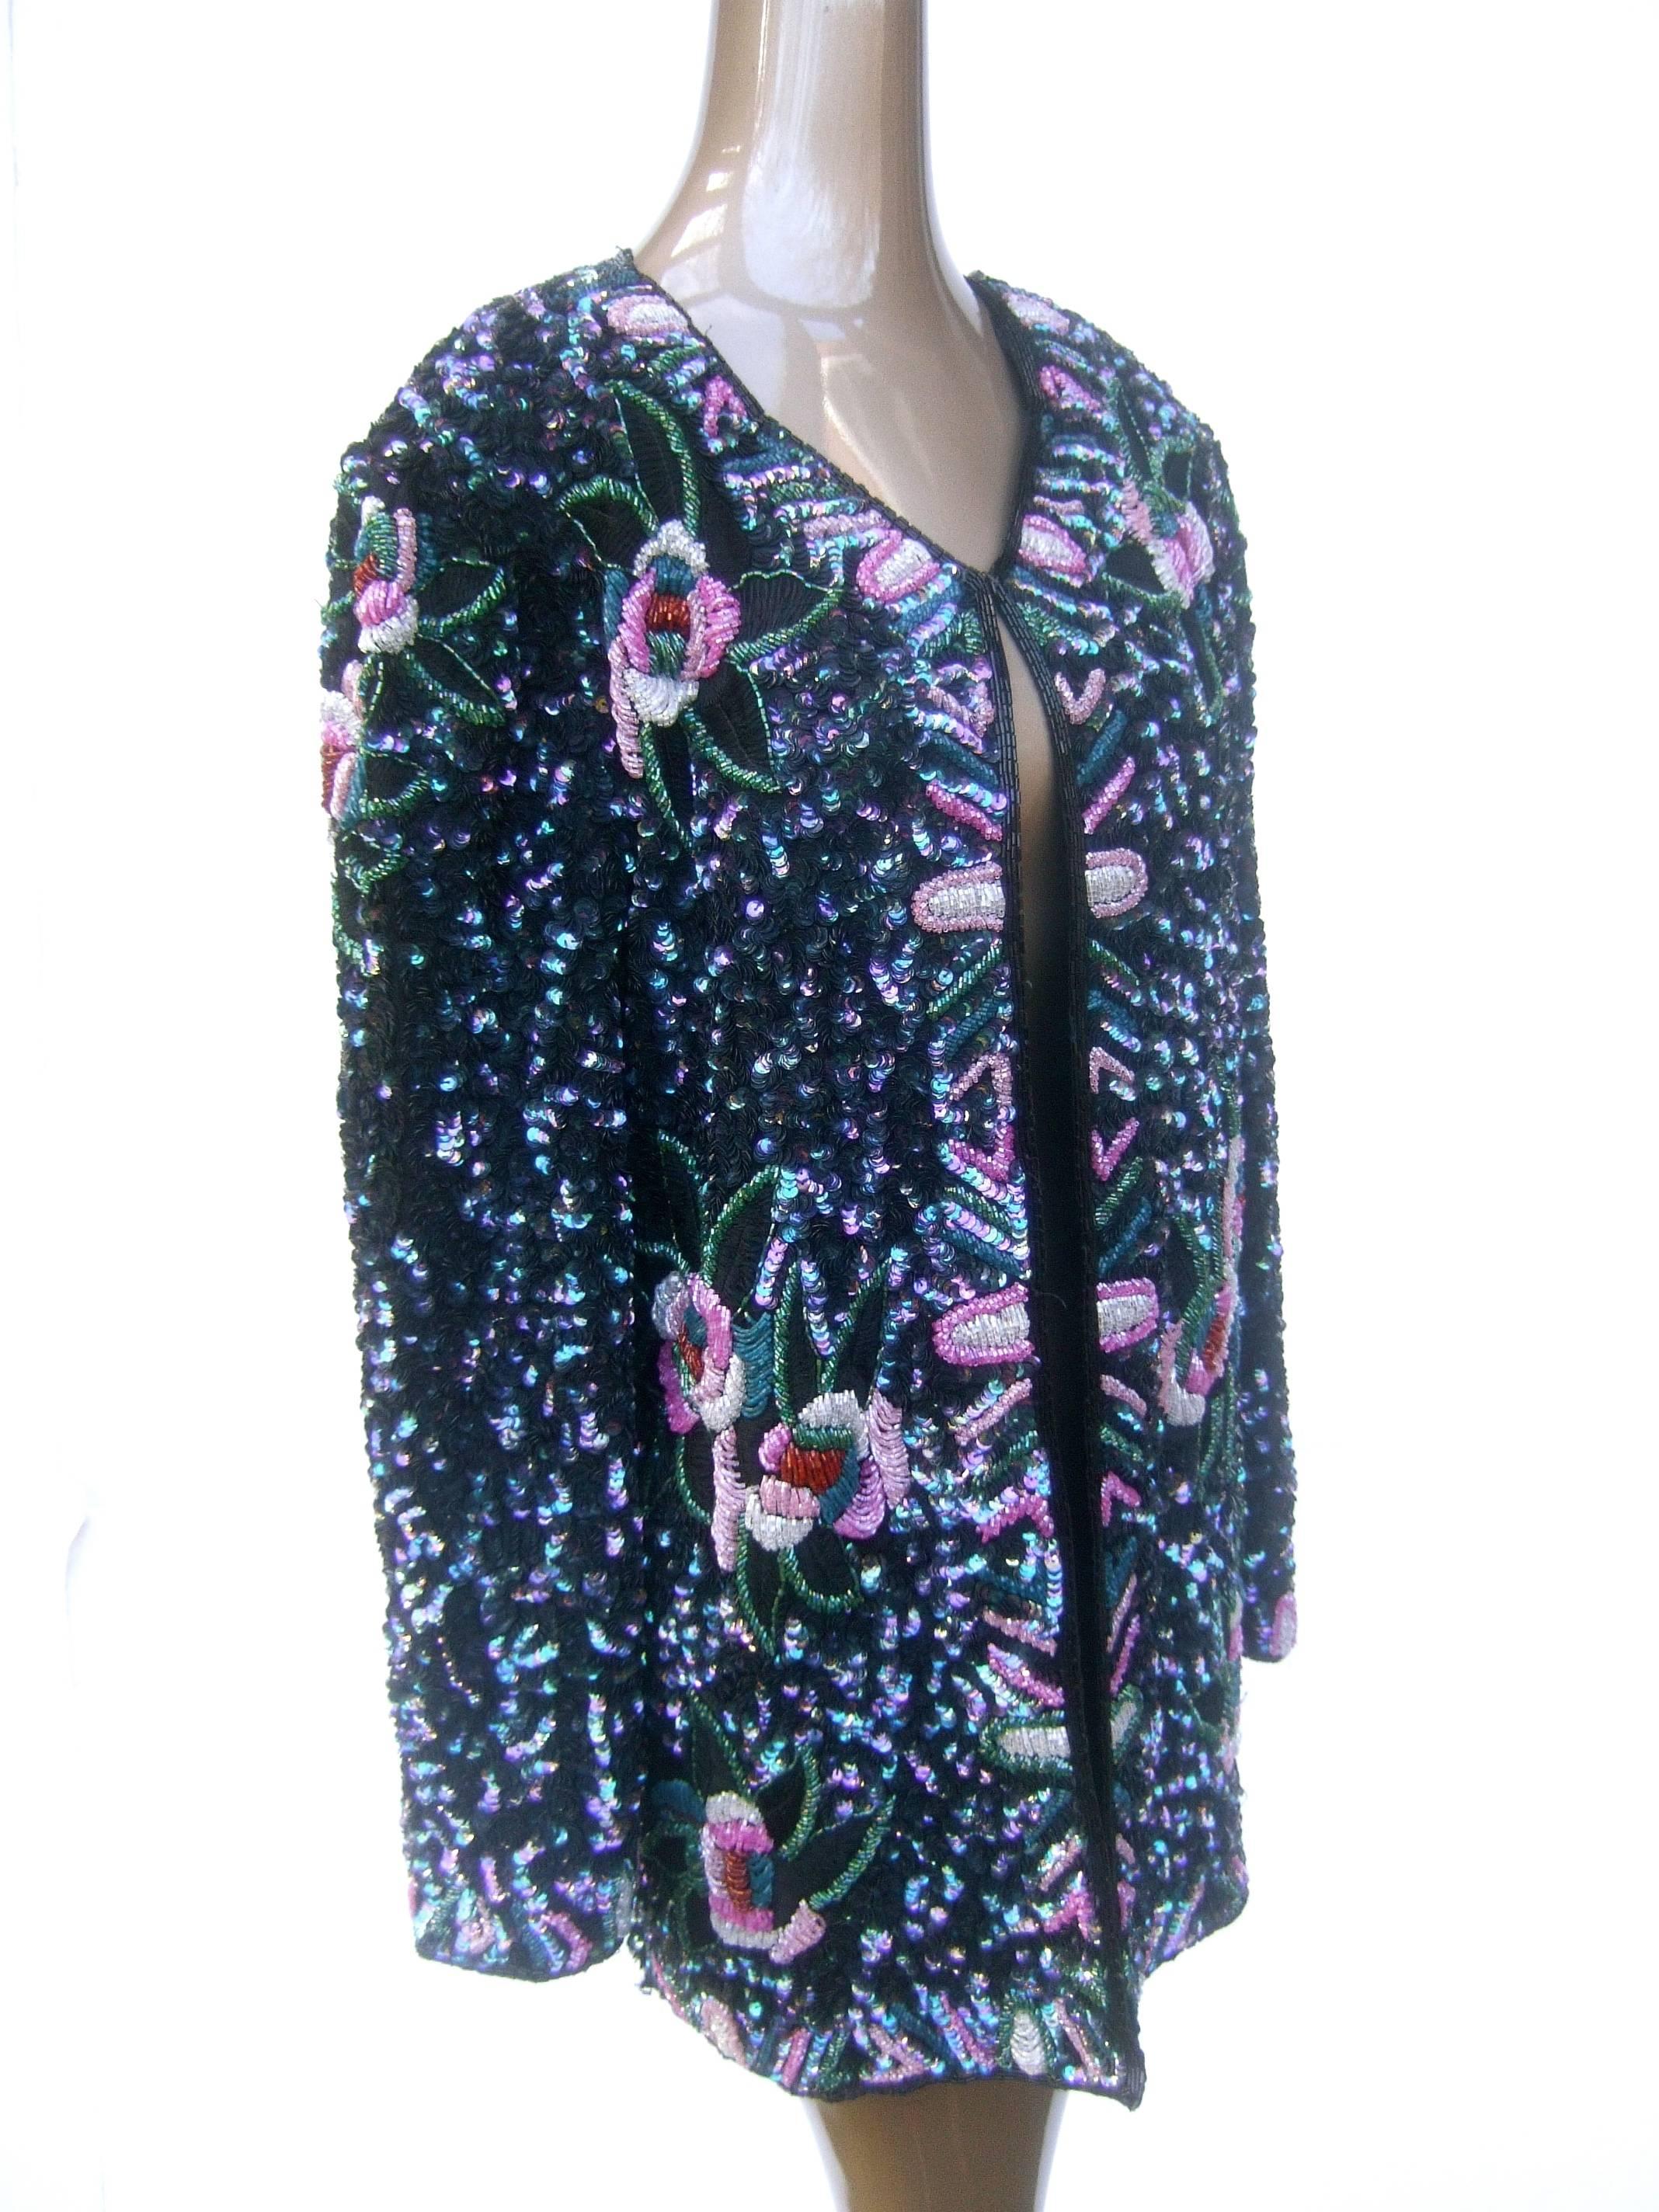 Silk Glass Beaded Sequined Evening Jacket for Saks Fifth Avenue c 1980s In Good Condition For Sale In University City, MO